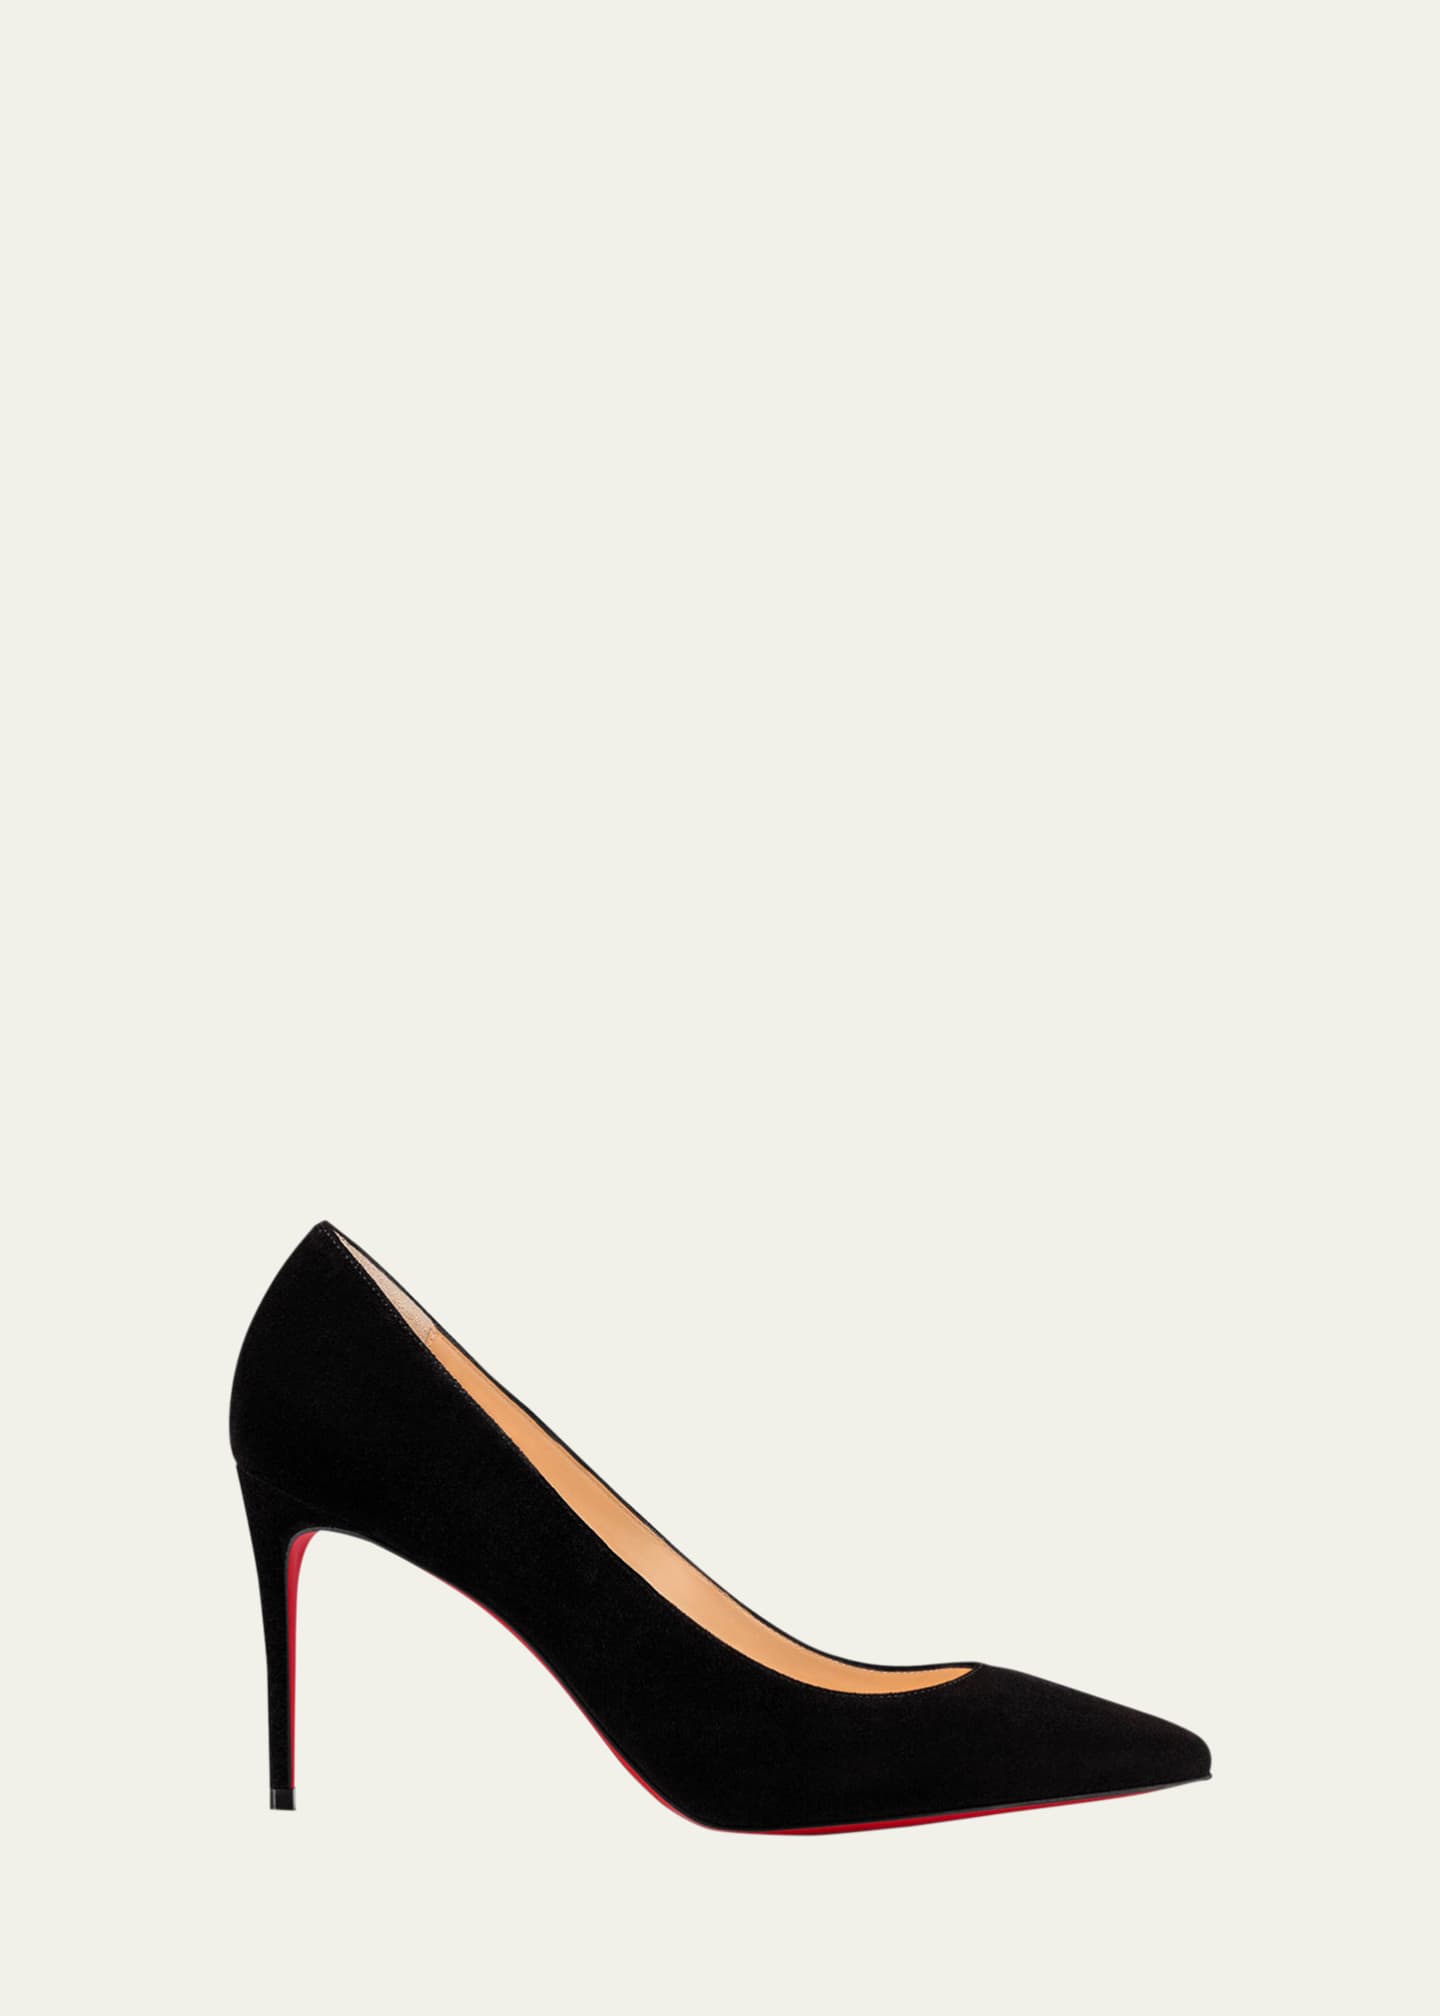 Christian Louboutin Kate 85mm Suede Red Sole Pumps Image 1 of 5